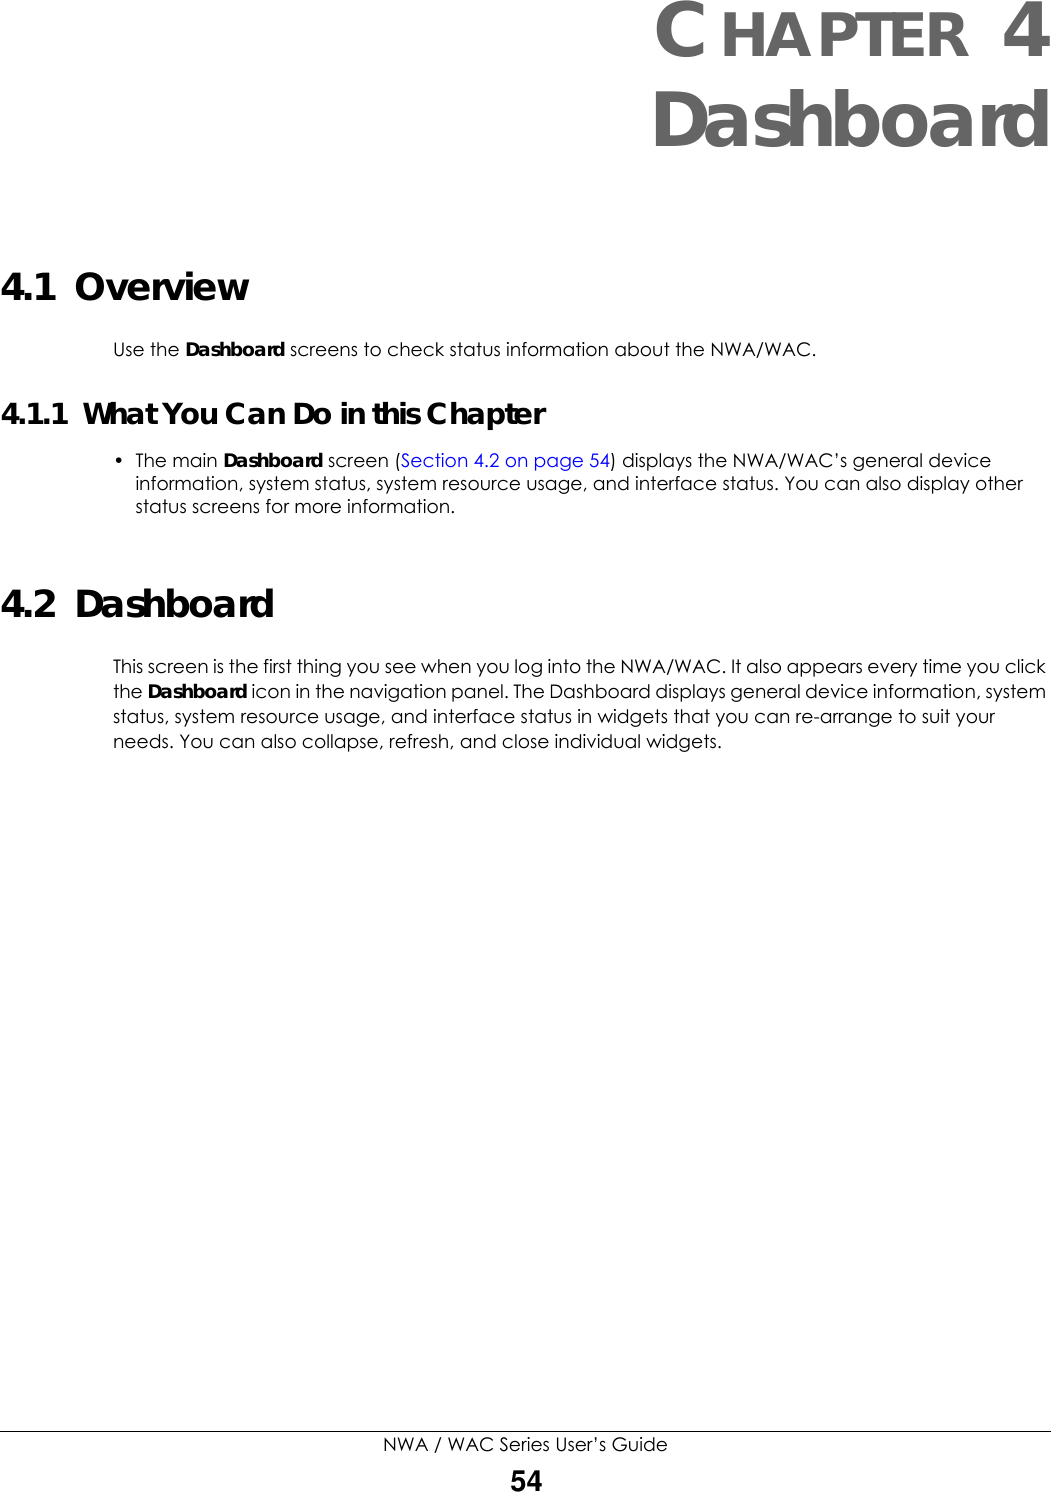 NWA / WAC Series User’s Guide54CHAPTER 4Dashboard4.1  OverviewUse the Dashboard screens to check status information about the NWA/WAC.4.1.1  What You Can Do in this Chapter• The main Dashboard screen (Section 4.2 on page 54) displays the NWA/WAC’s general device information, system status, system resource usage, and interface status. You can also display other status screens for more information.4.2  DashboardThis screen is the first thing you see when you log into the NWA/WAC. It also appears every time you click the Dashboard icon in the navigation panel. The Dashboard displays general device information, system status, system resource usage, and interface status in widgets that you can re-arrange to suit your needs. You can also collapse, refresh, and close individual widgets.